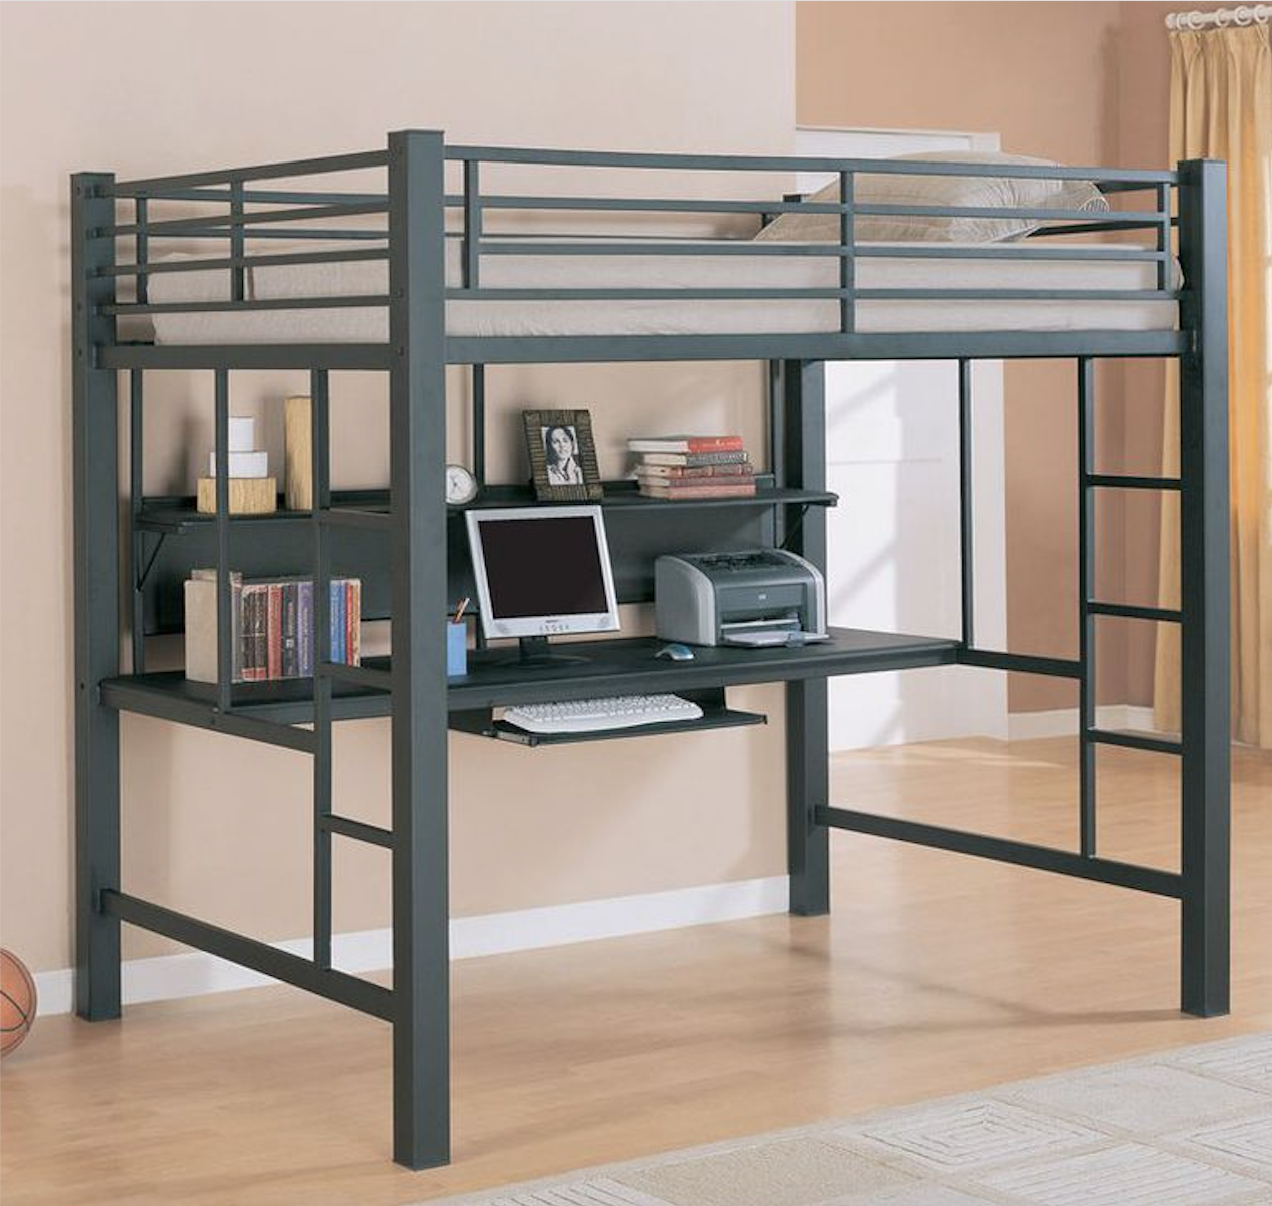 13 Best Loft Beds For S, Bunk Bed To Loft Bed